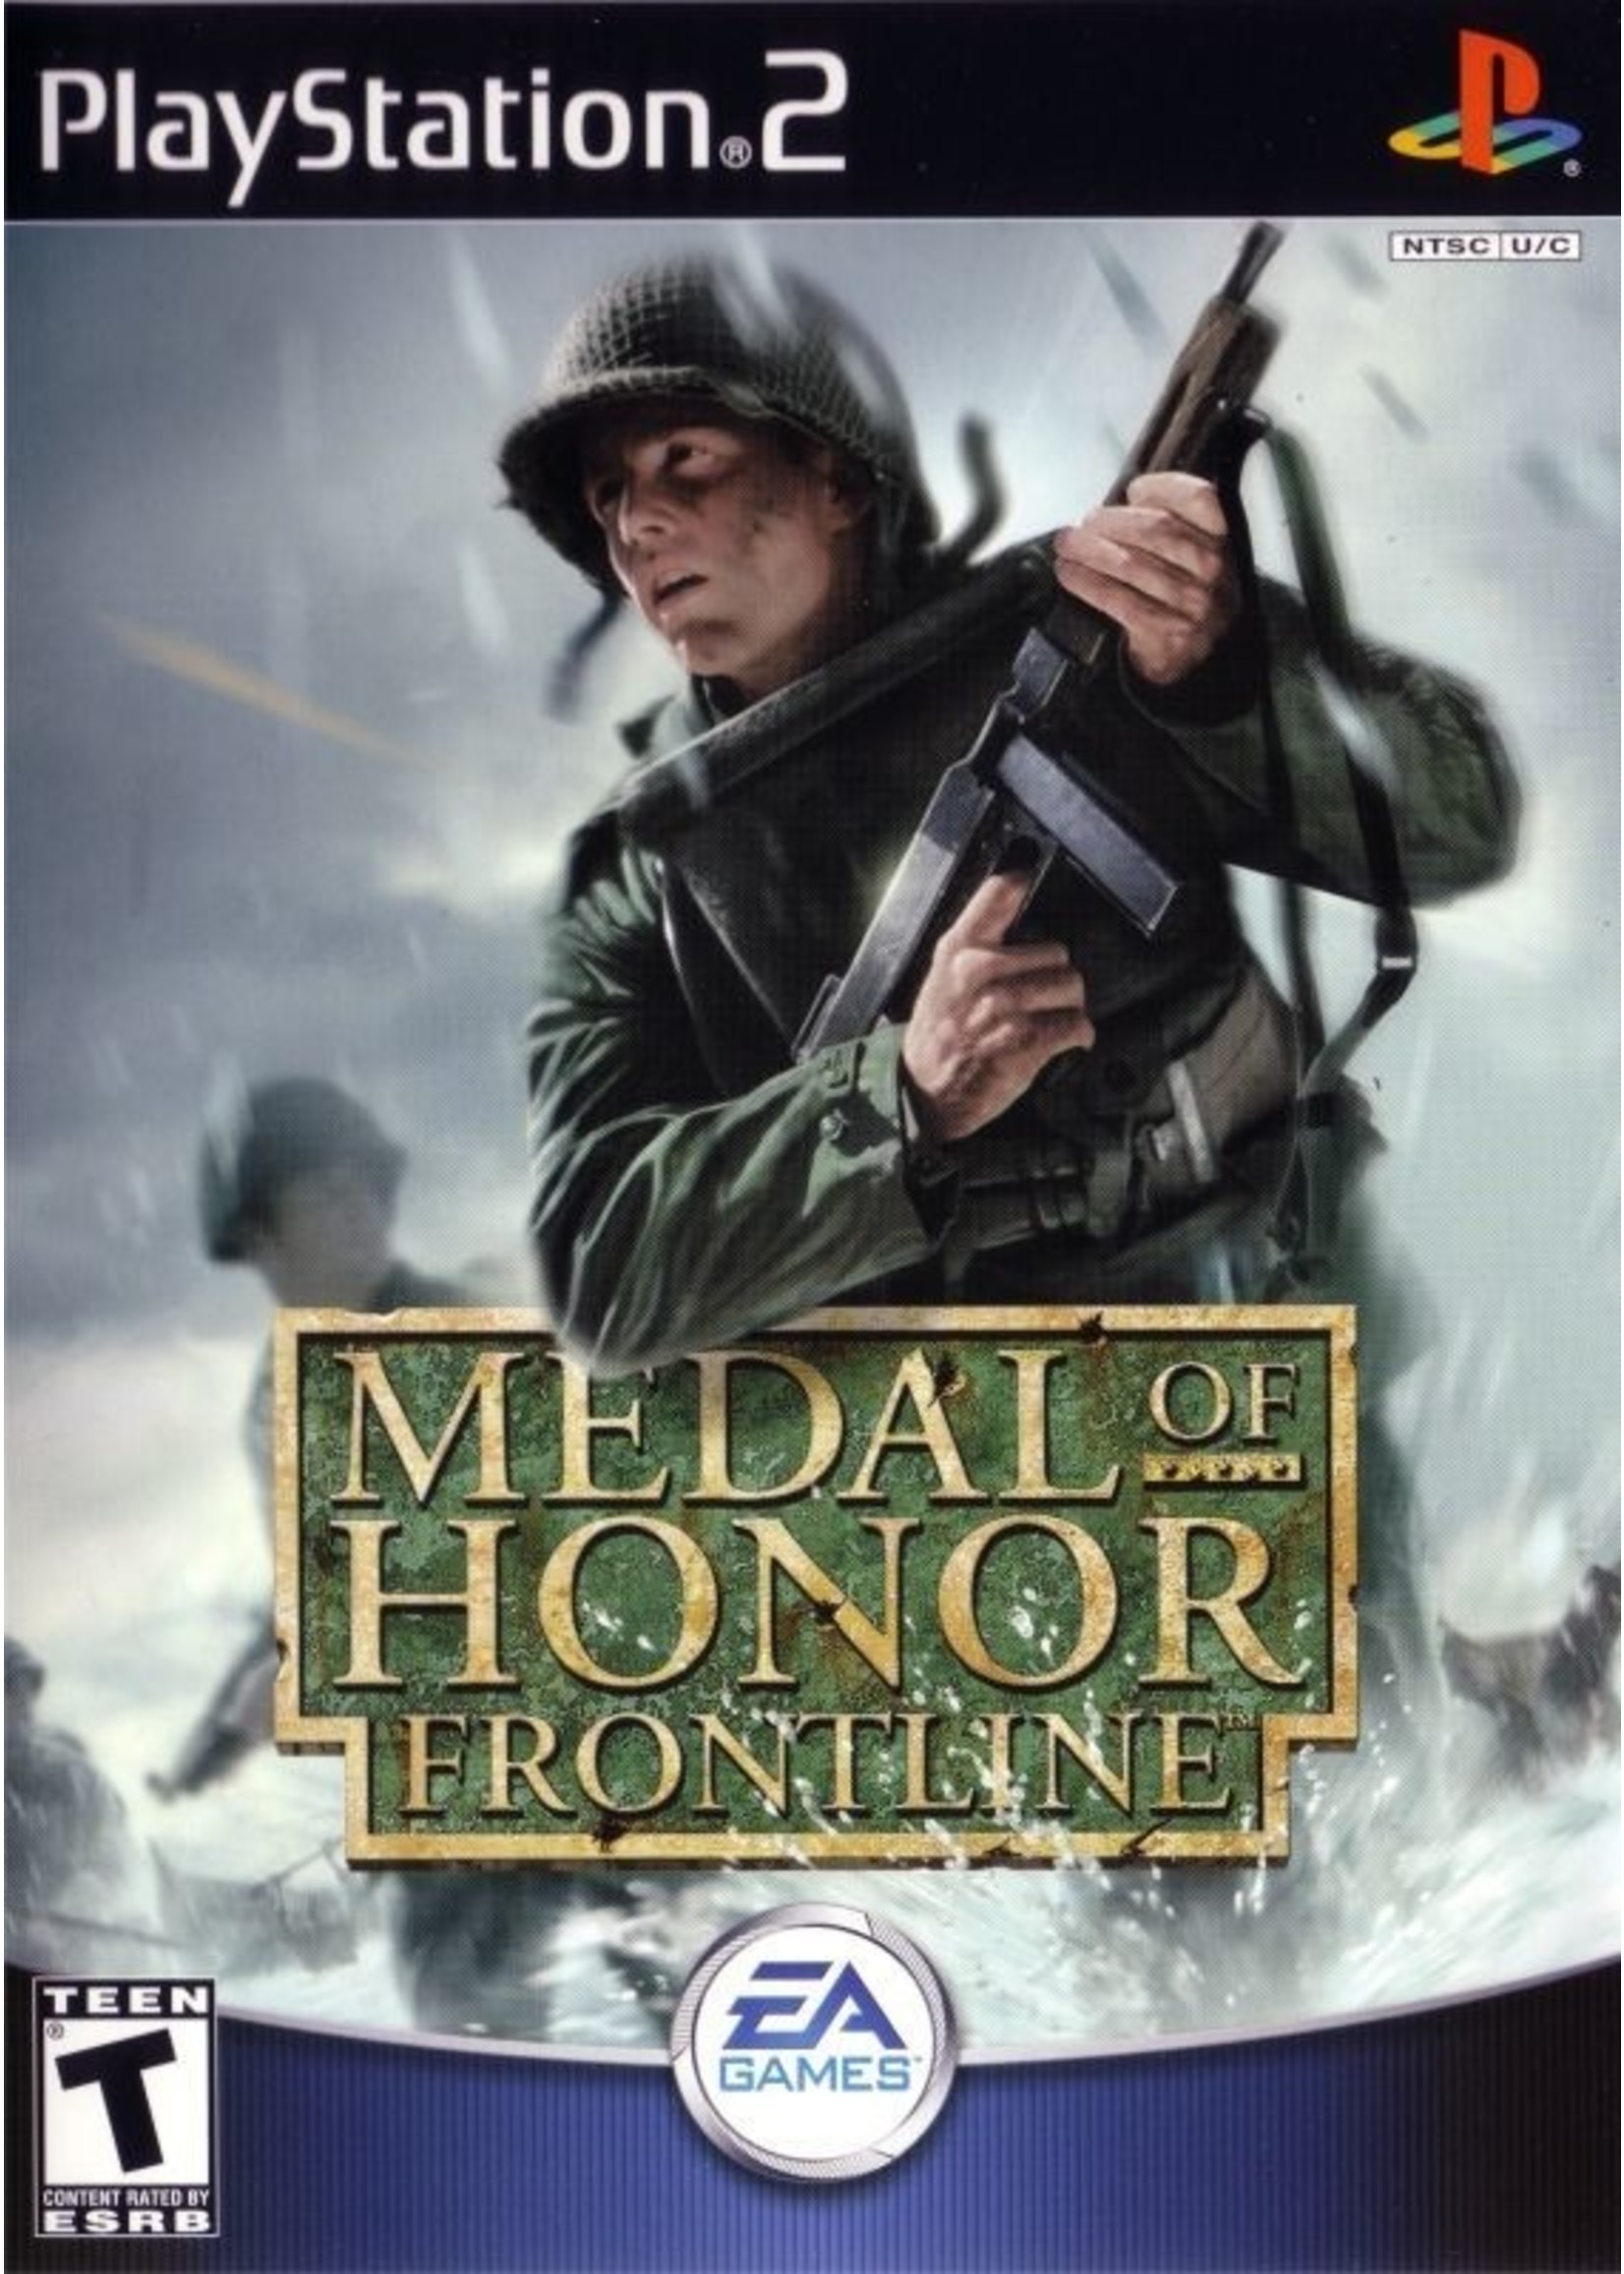 Sony Playstation 2 (PS2) Medal of Honor Frontline